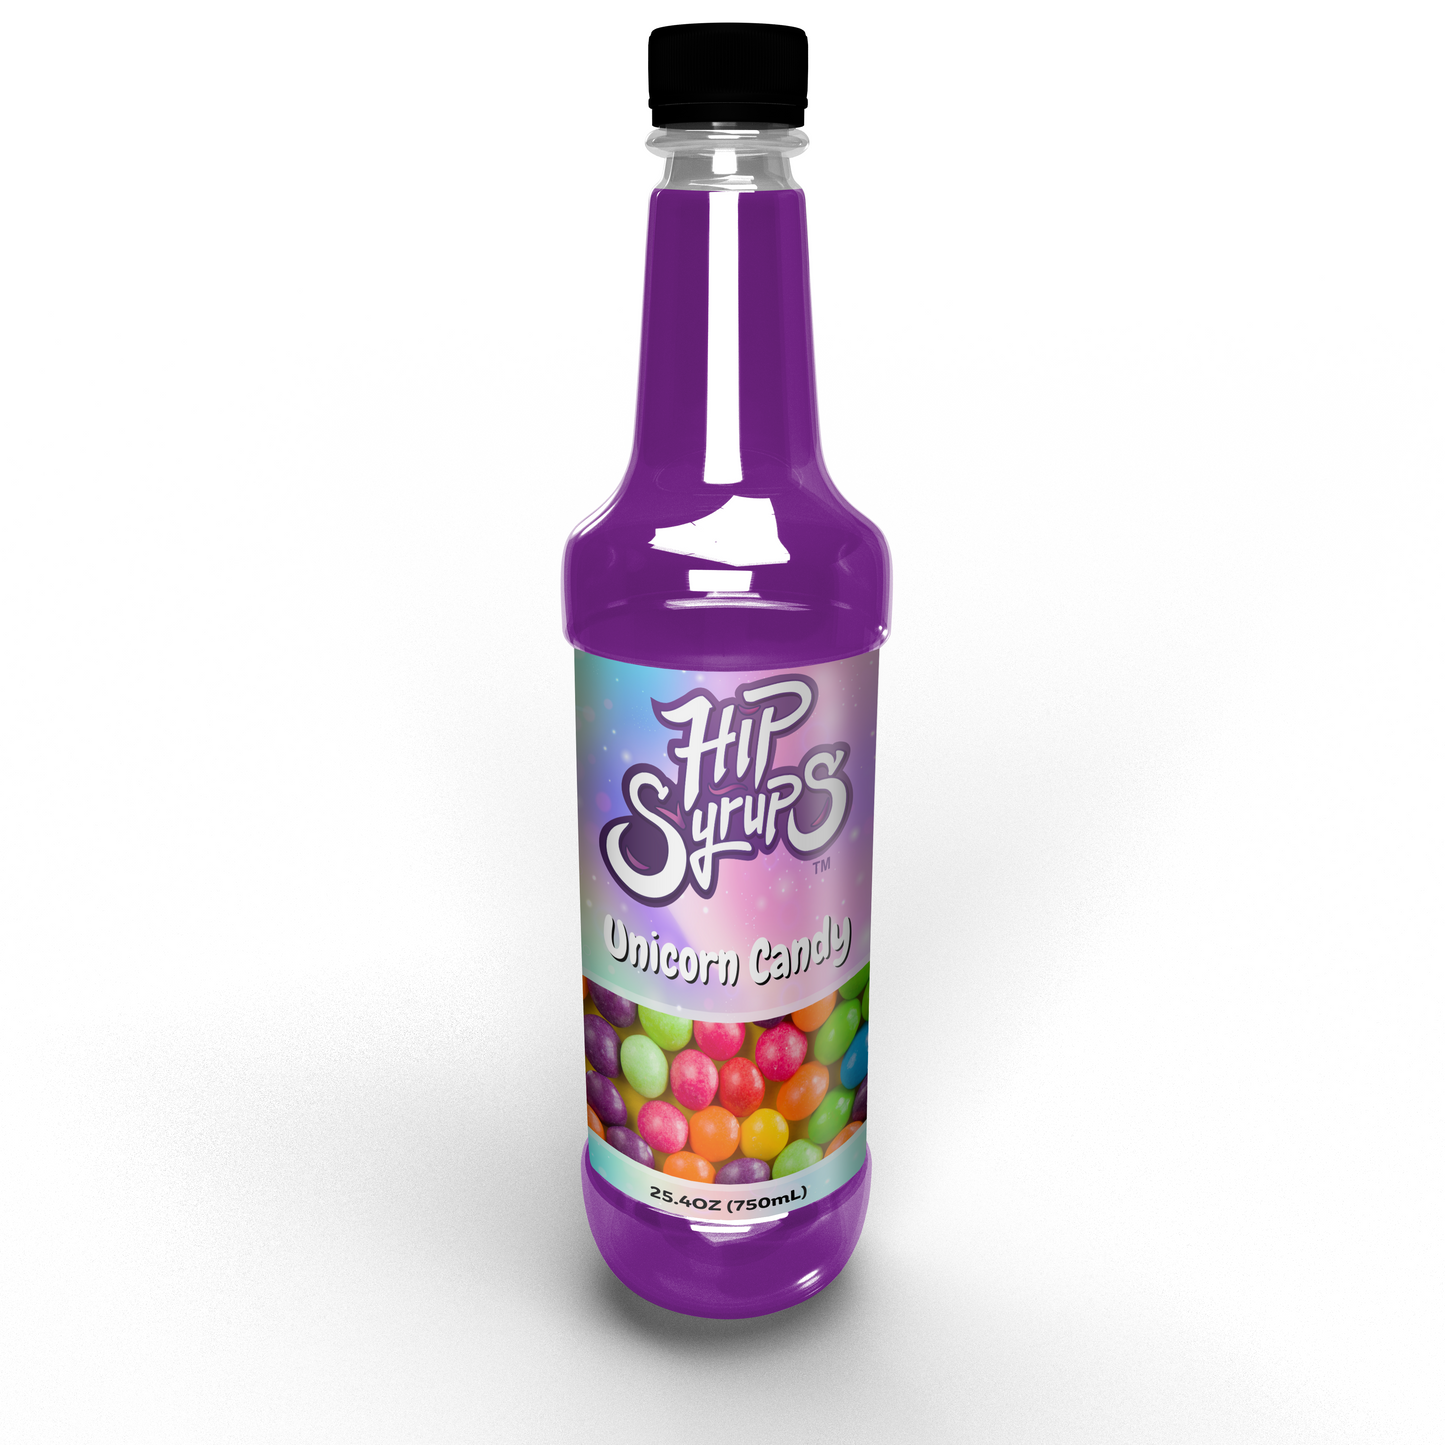 Unicorn Candy Hip Syrup - Case of 6 ($8.99ea)